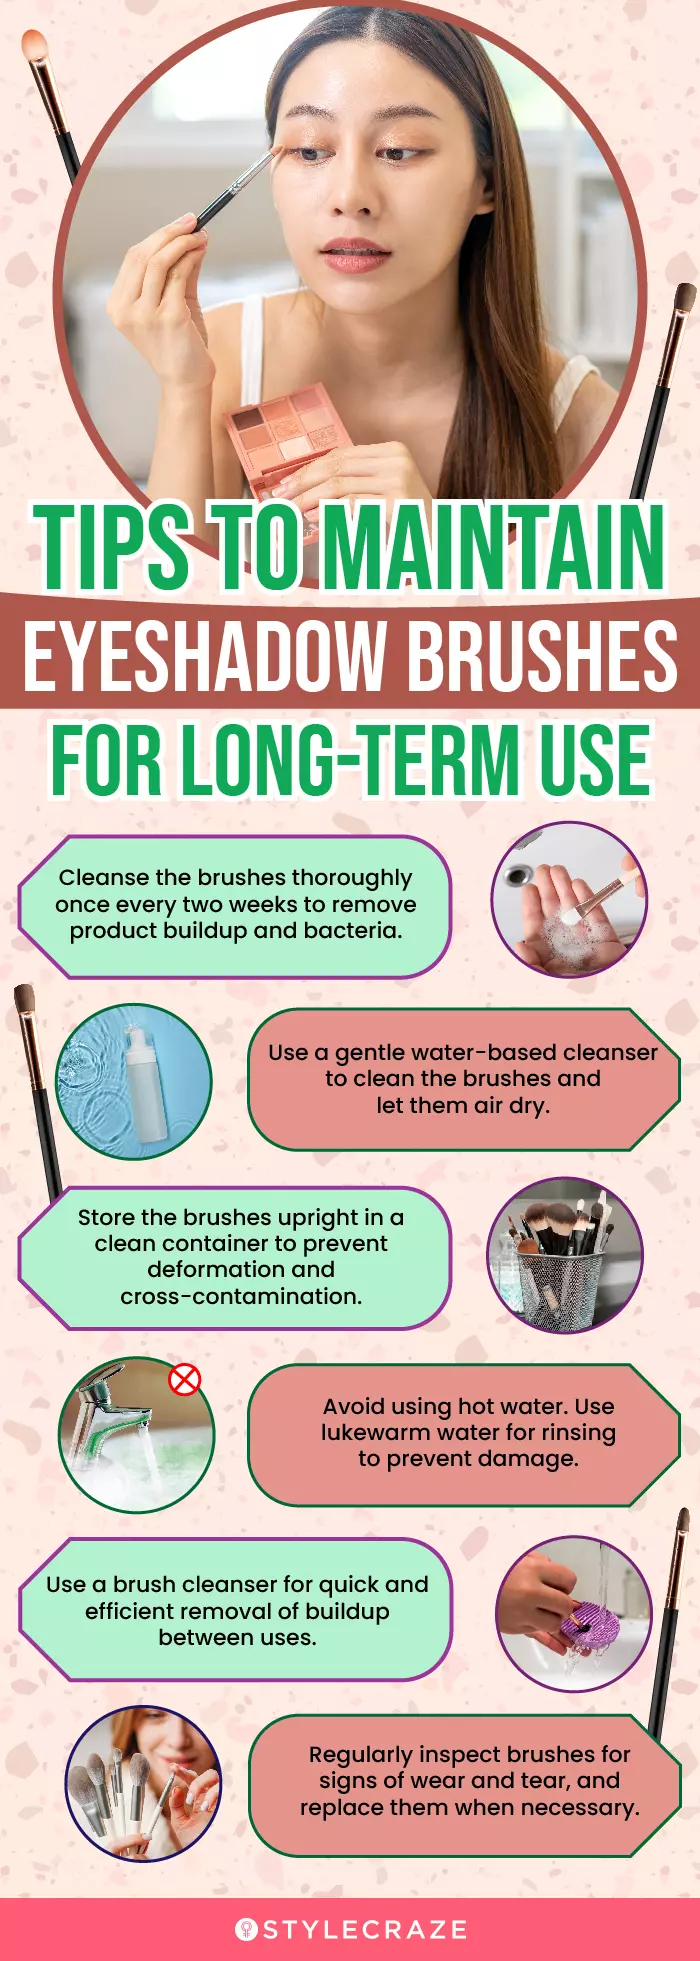 Tips To Maintain Eyeshadow Brushes For Long-Term Use (infographic)